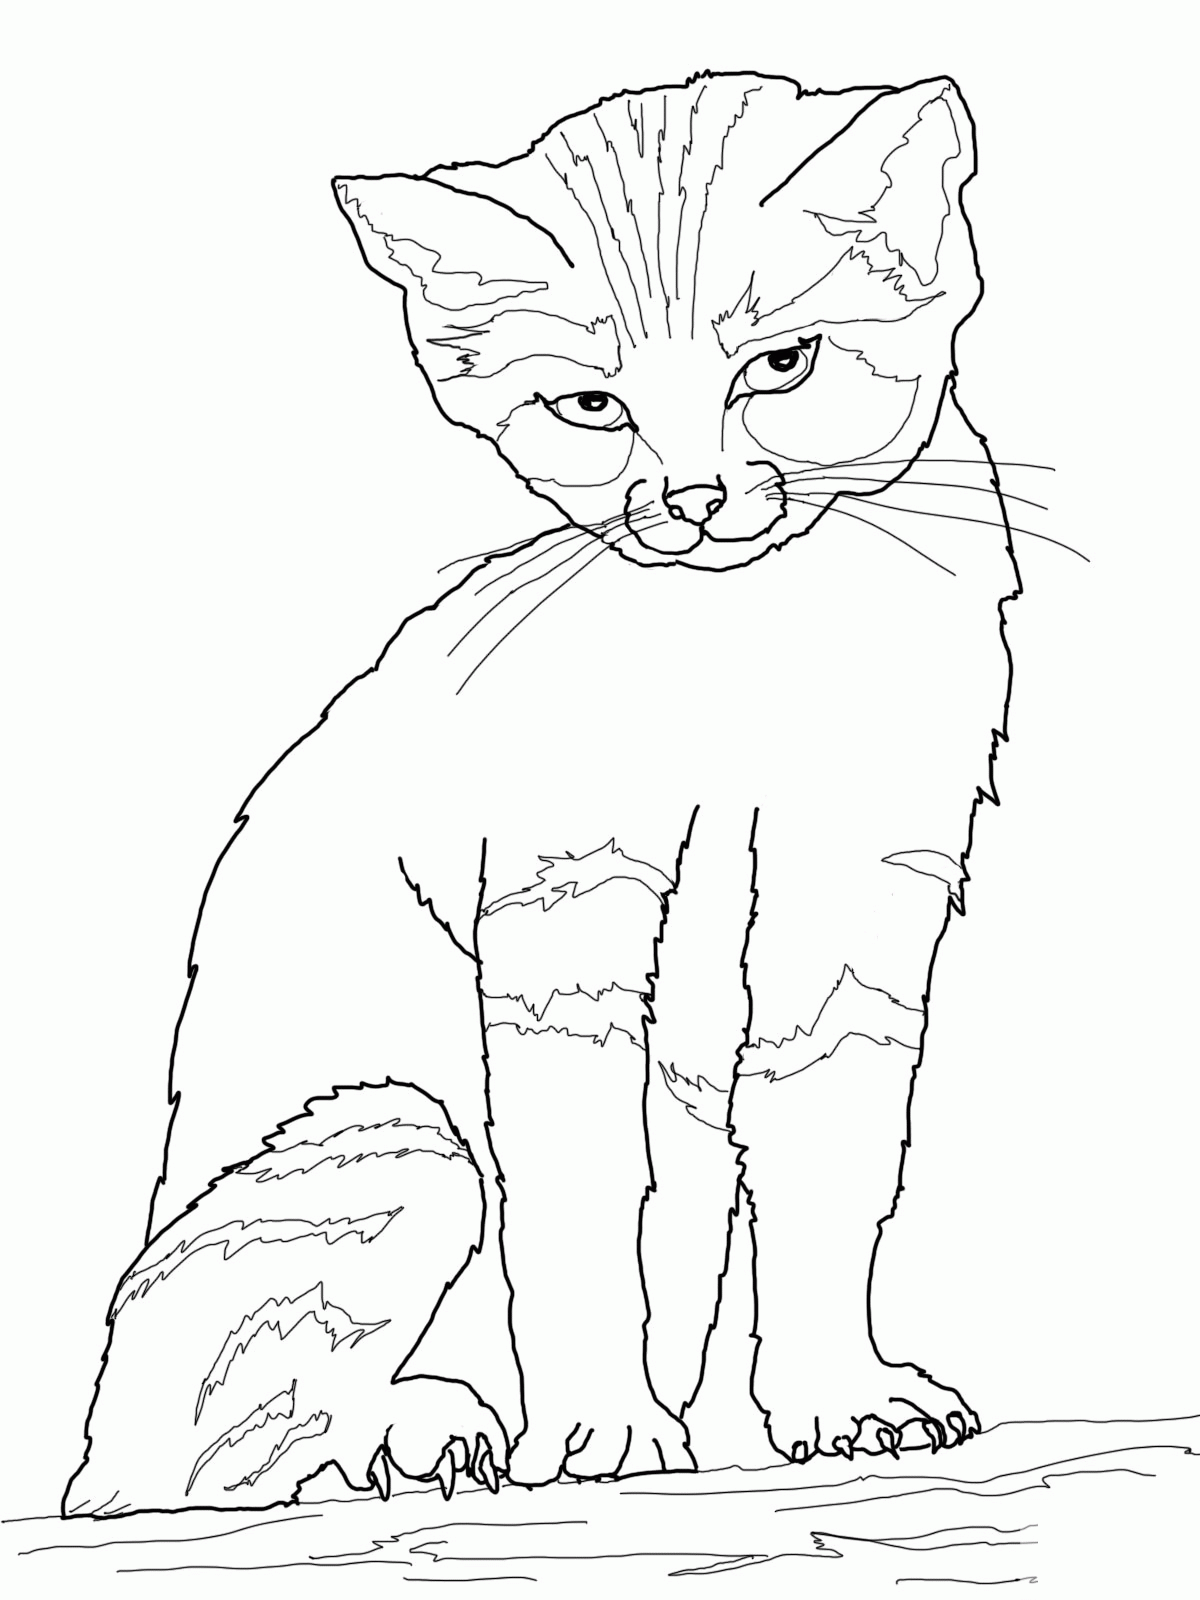 cat-and-dog-coloring-pages-printable